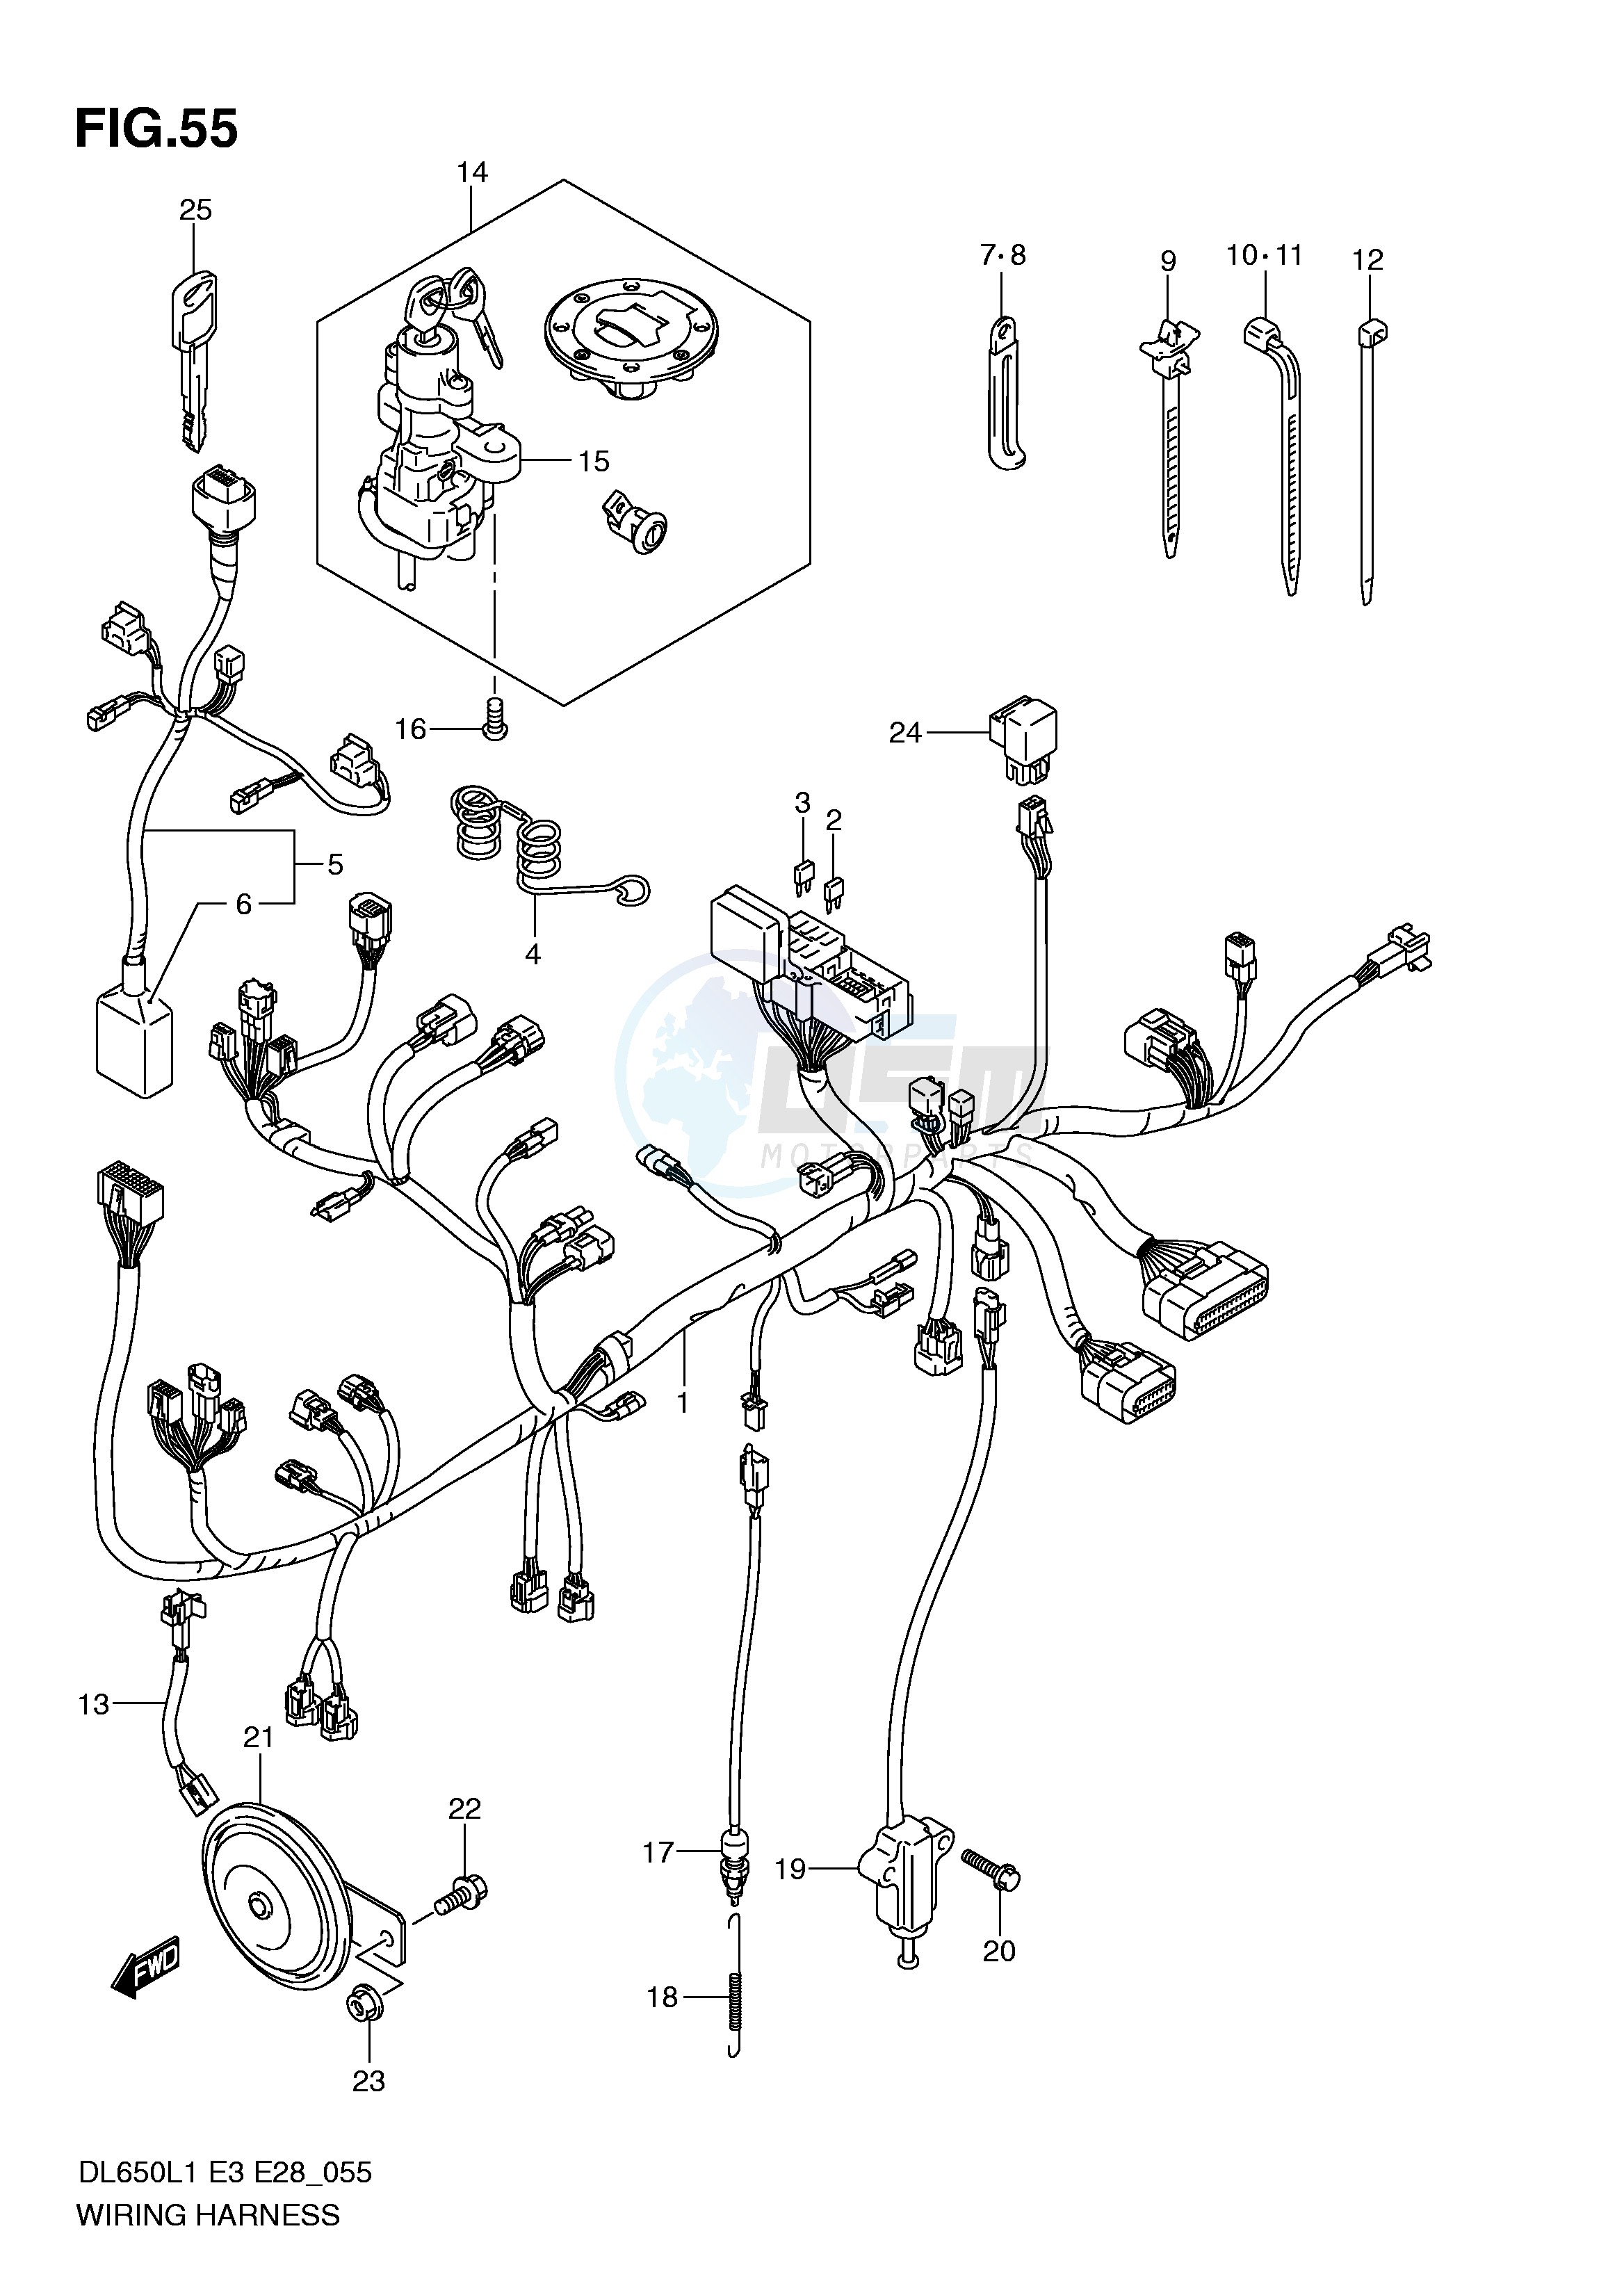 WIRING HARNESS (DL650L1 E33) image